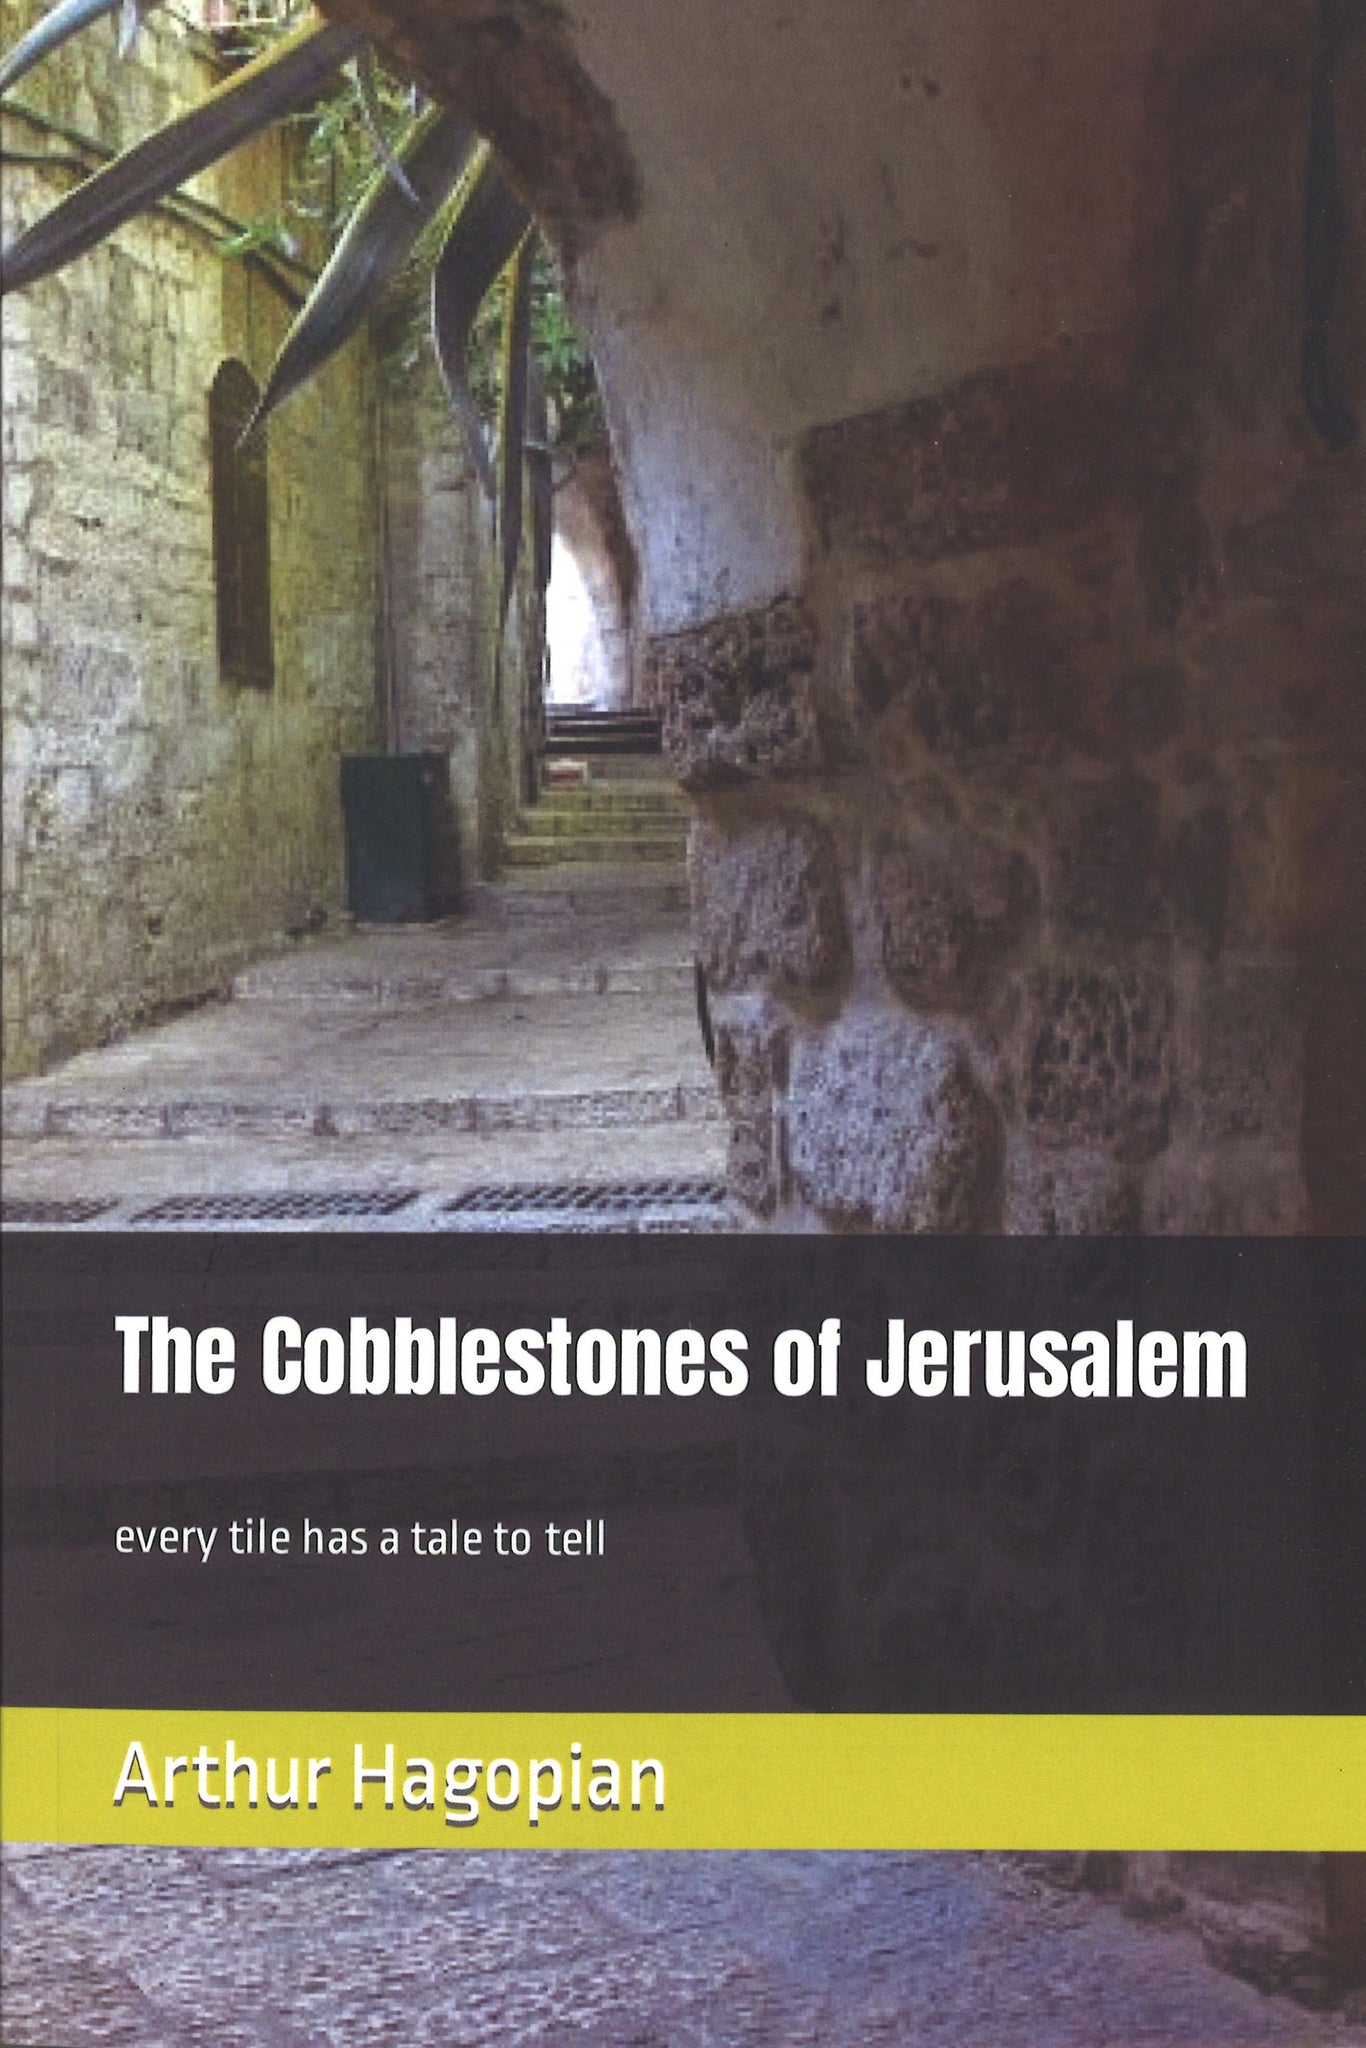 COBBLESTONES OF JERSUSALEM, THE: every tile has a tale to tell